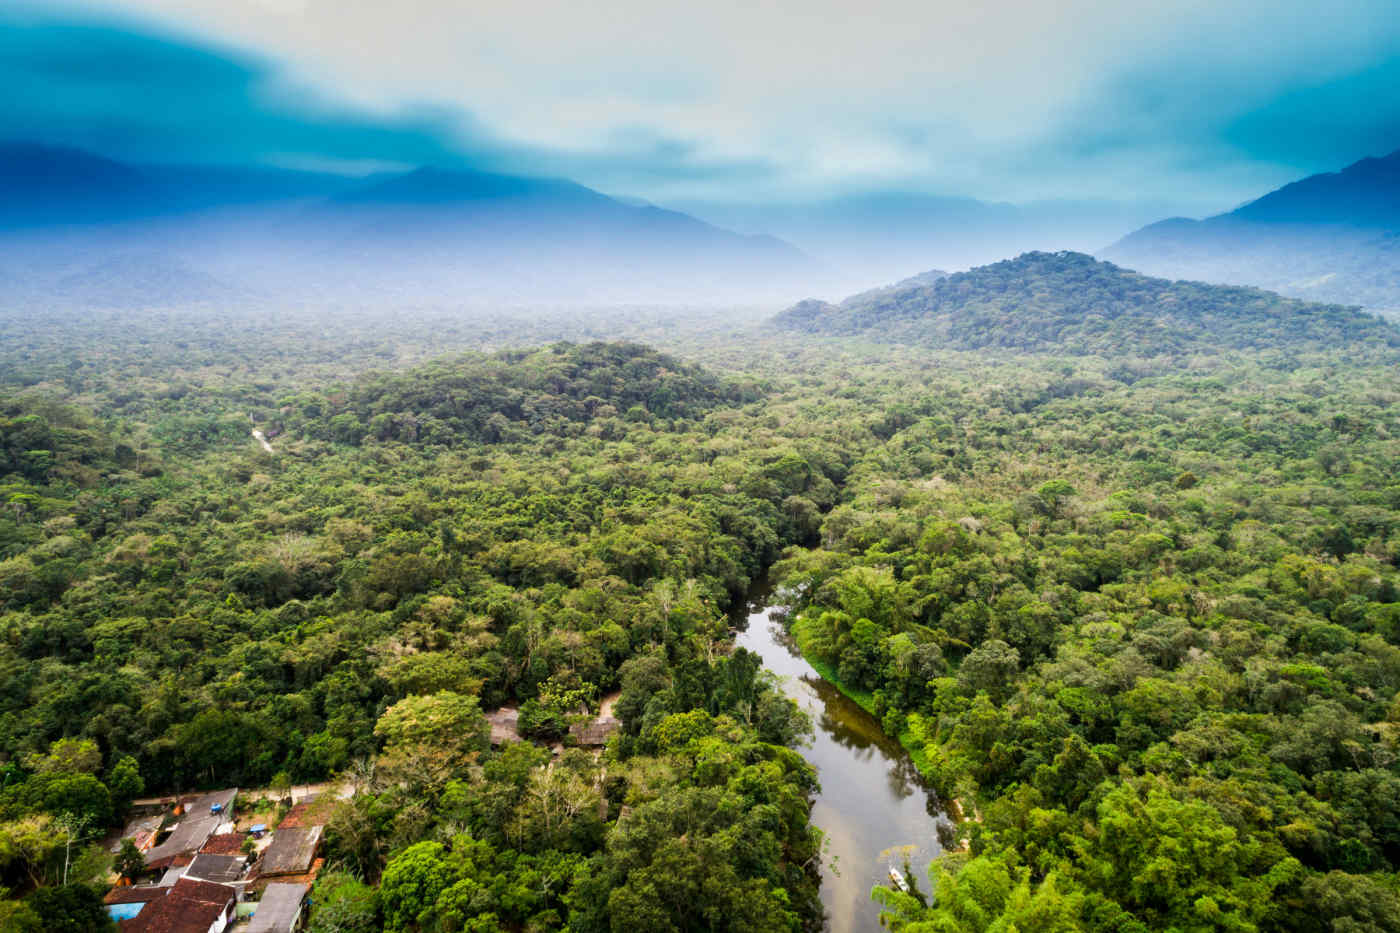 Travel Guide to the Amazon Rainforest